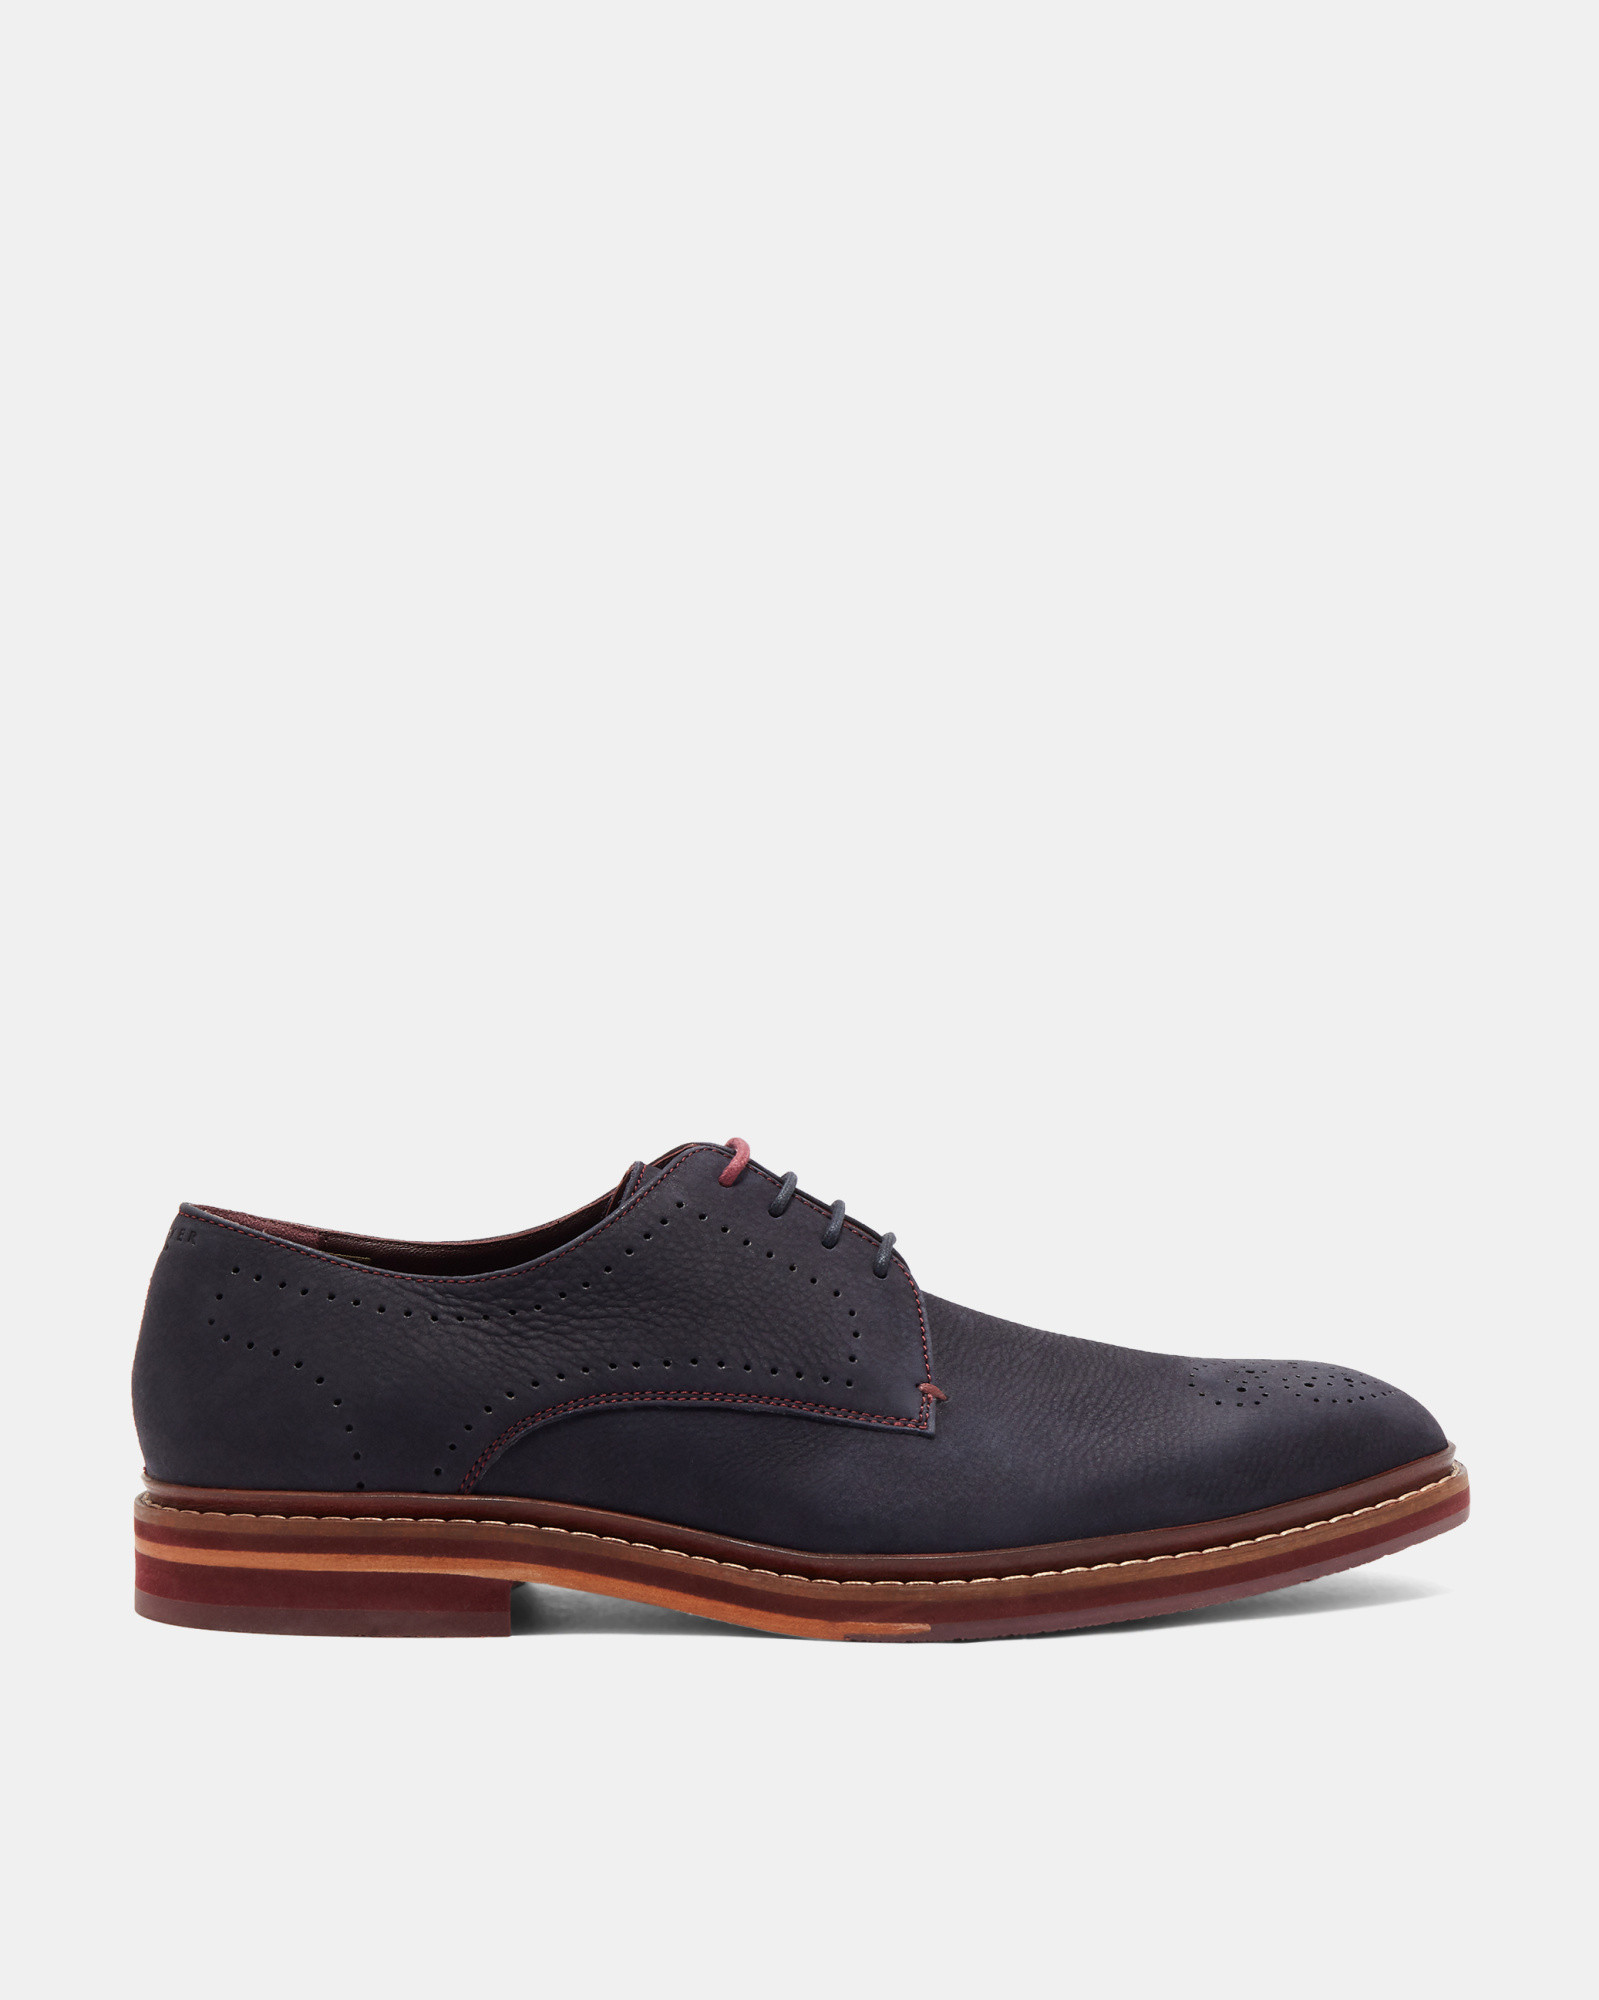 ZIGEEE Nubuck leather Derby shoes